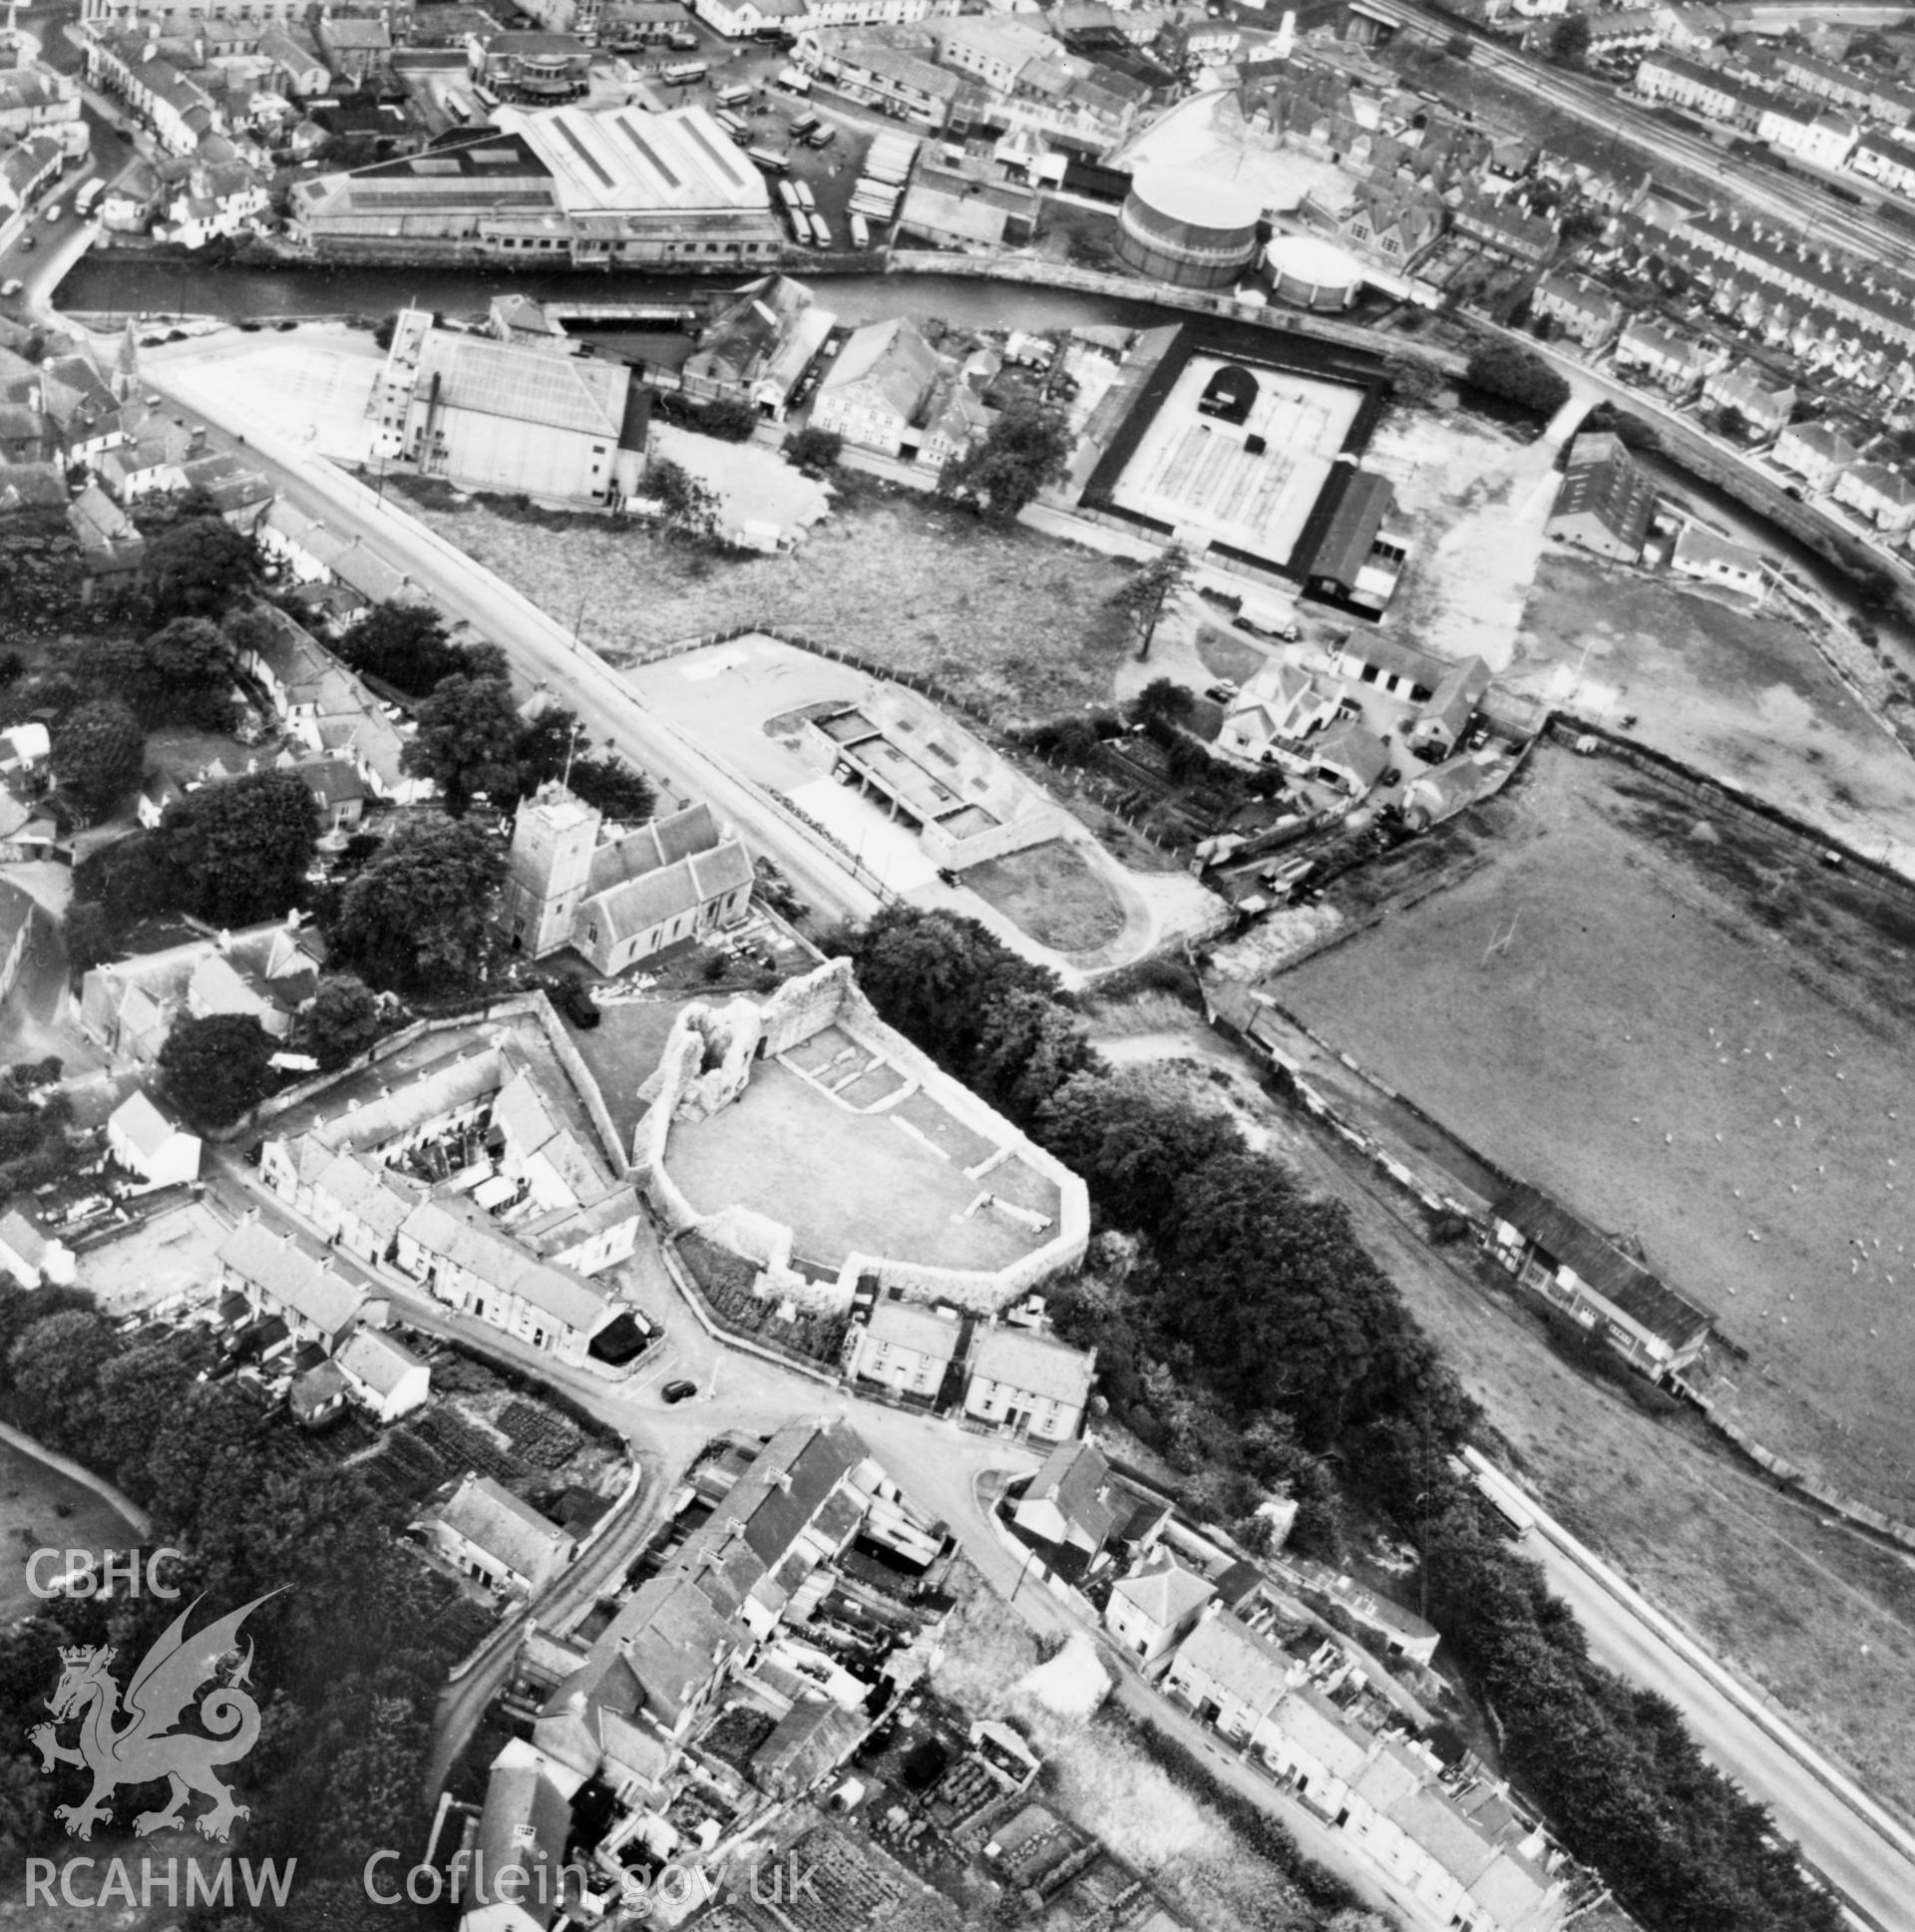 View of Bridgend showing castle and St Illtyd's church (reversed). Oblique aerial photograph, 5?" cut roll film.